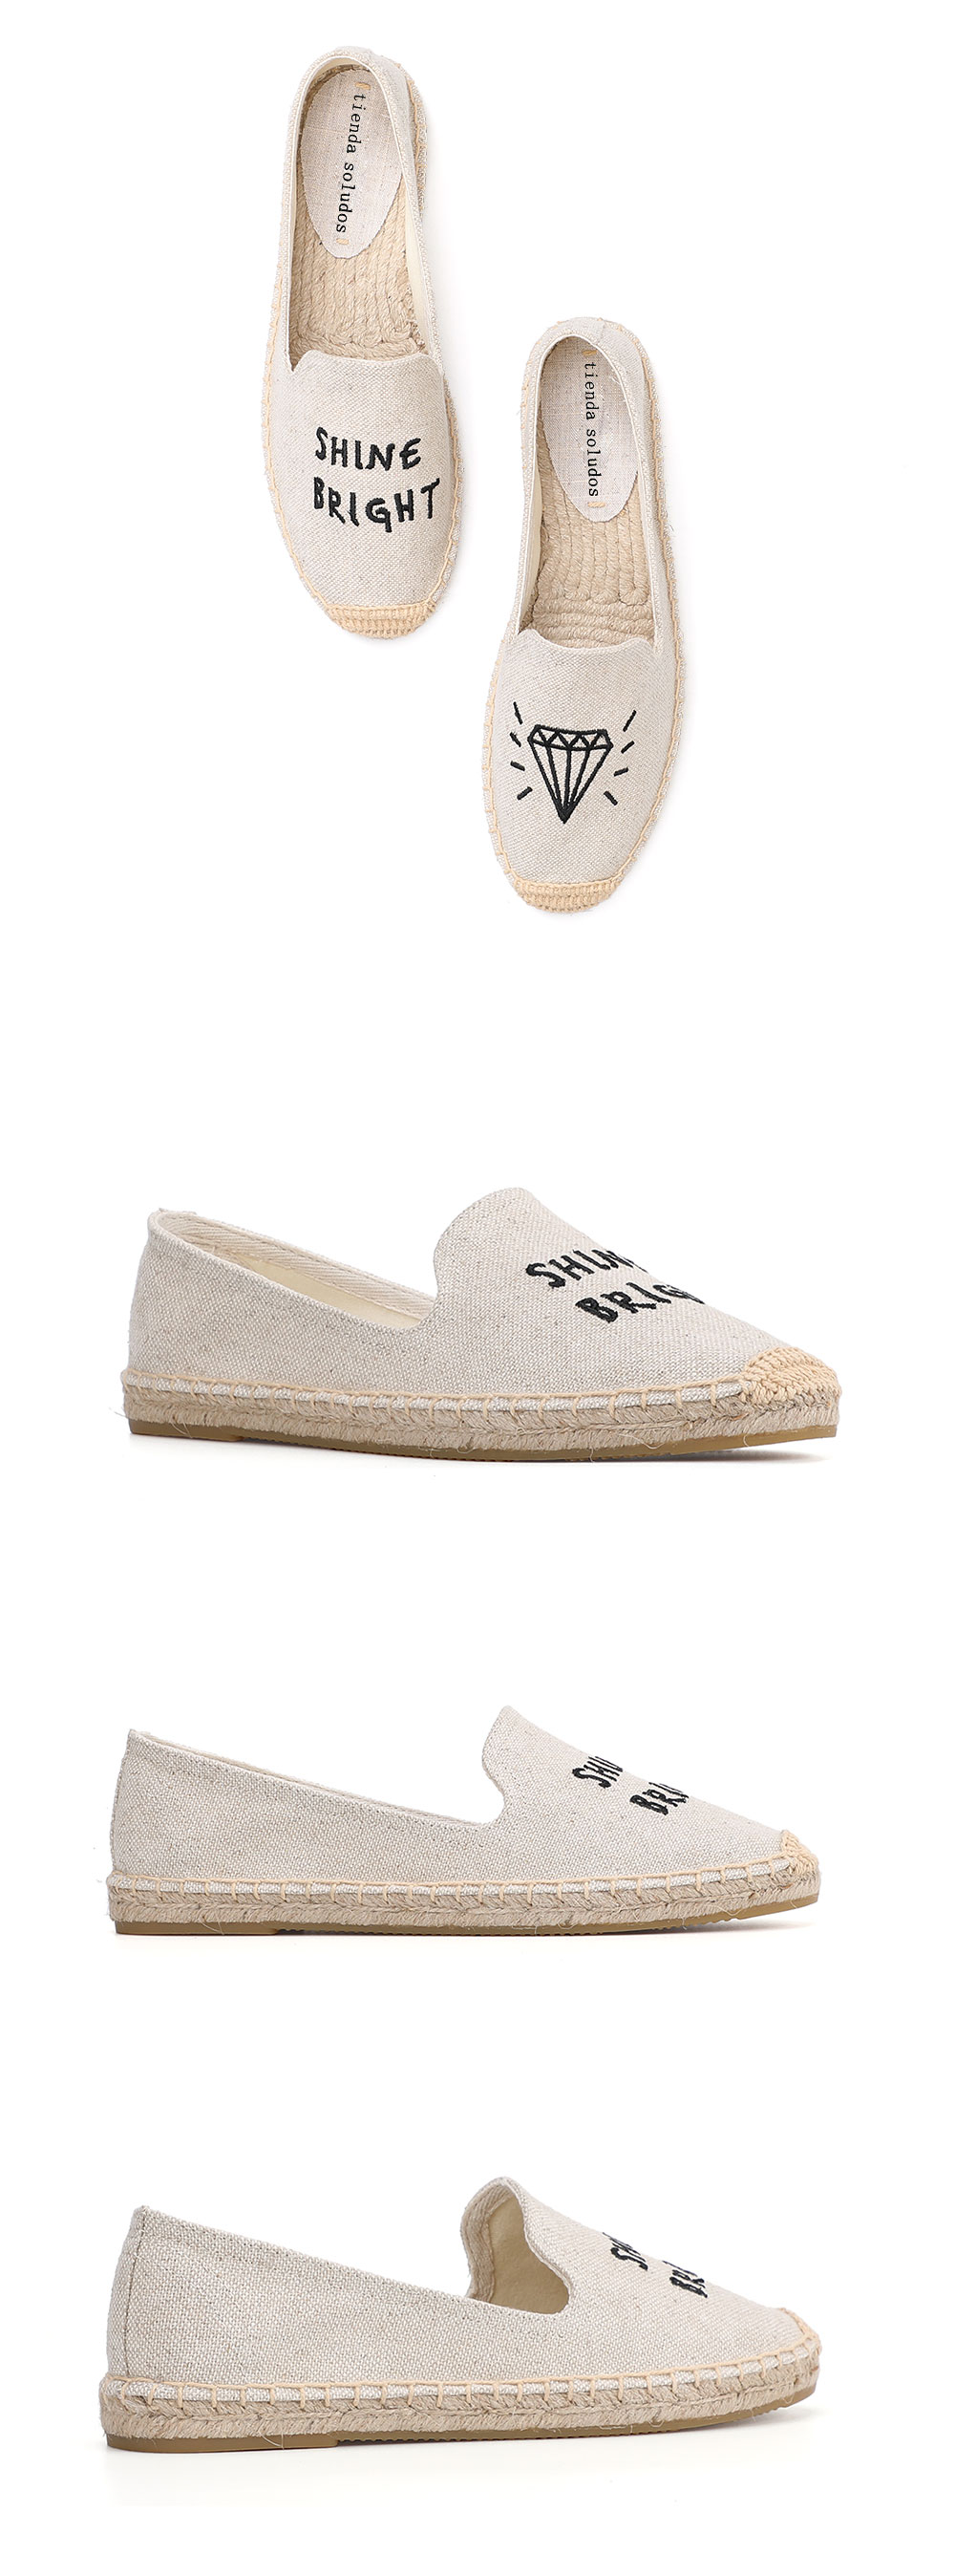 Women's Shoes 2022 Ballet Flats Round Toe Espadrilles For Flat Ladies Rushed Sale Hemp Sapatos Zapatillas Mujer Casual